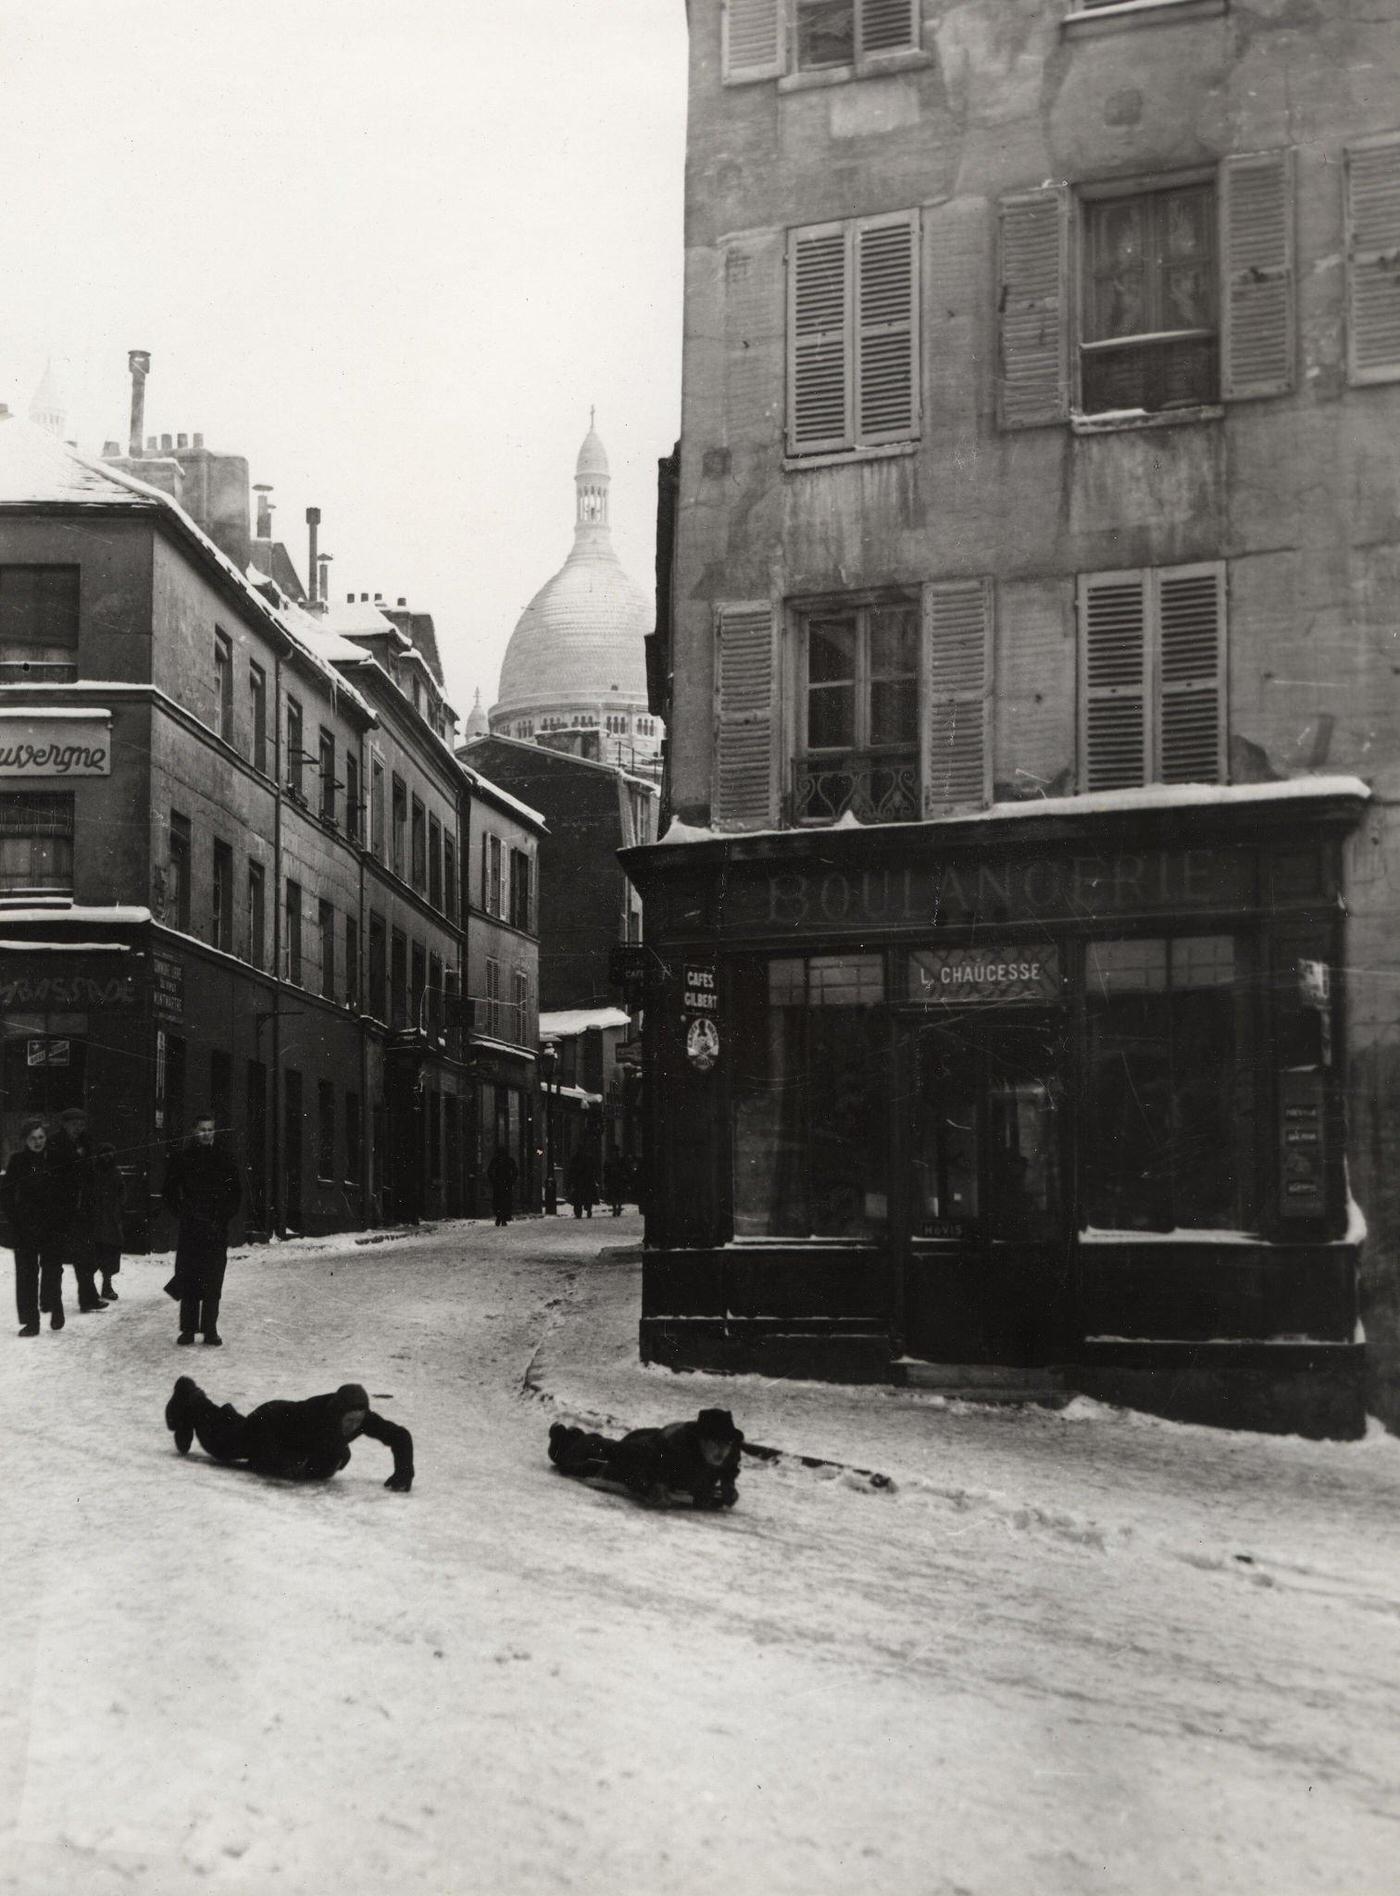 Sledging On The Slopes Of Montmartre, Paris, 1950.